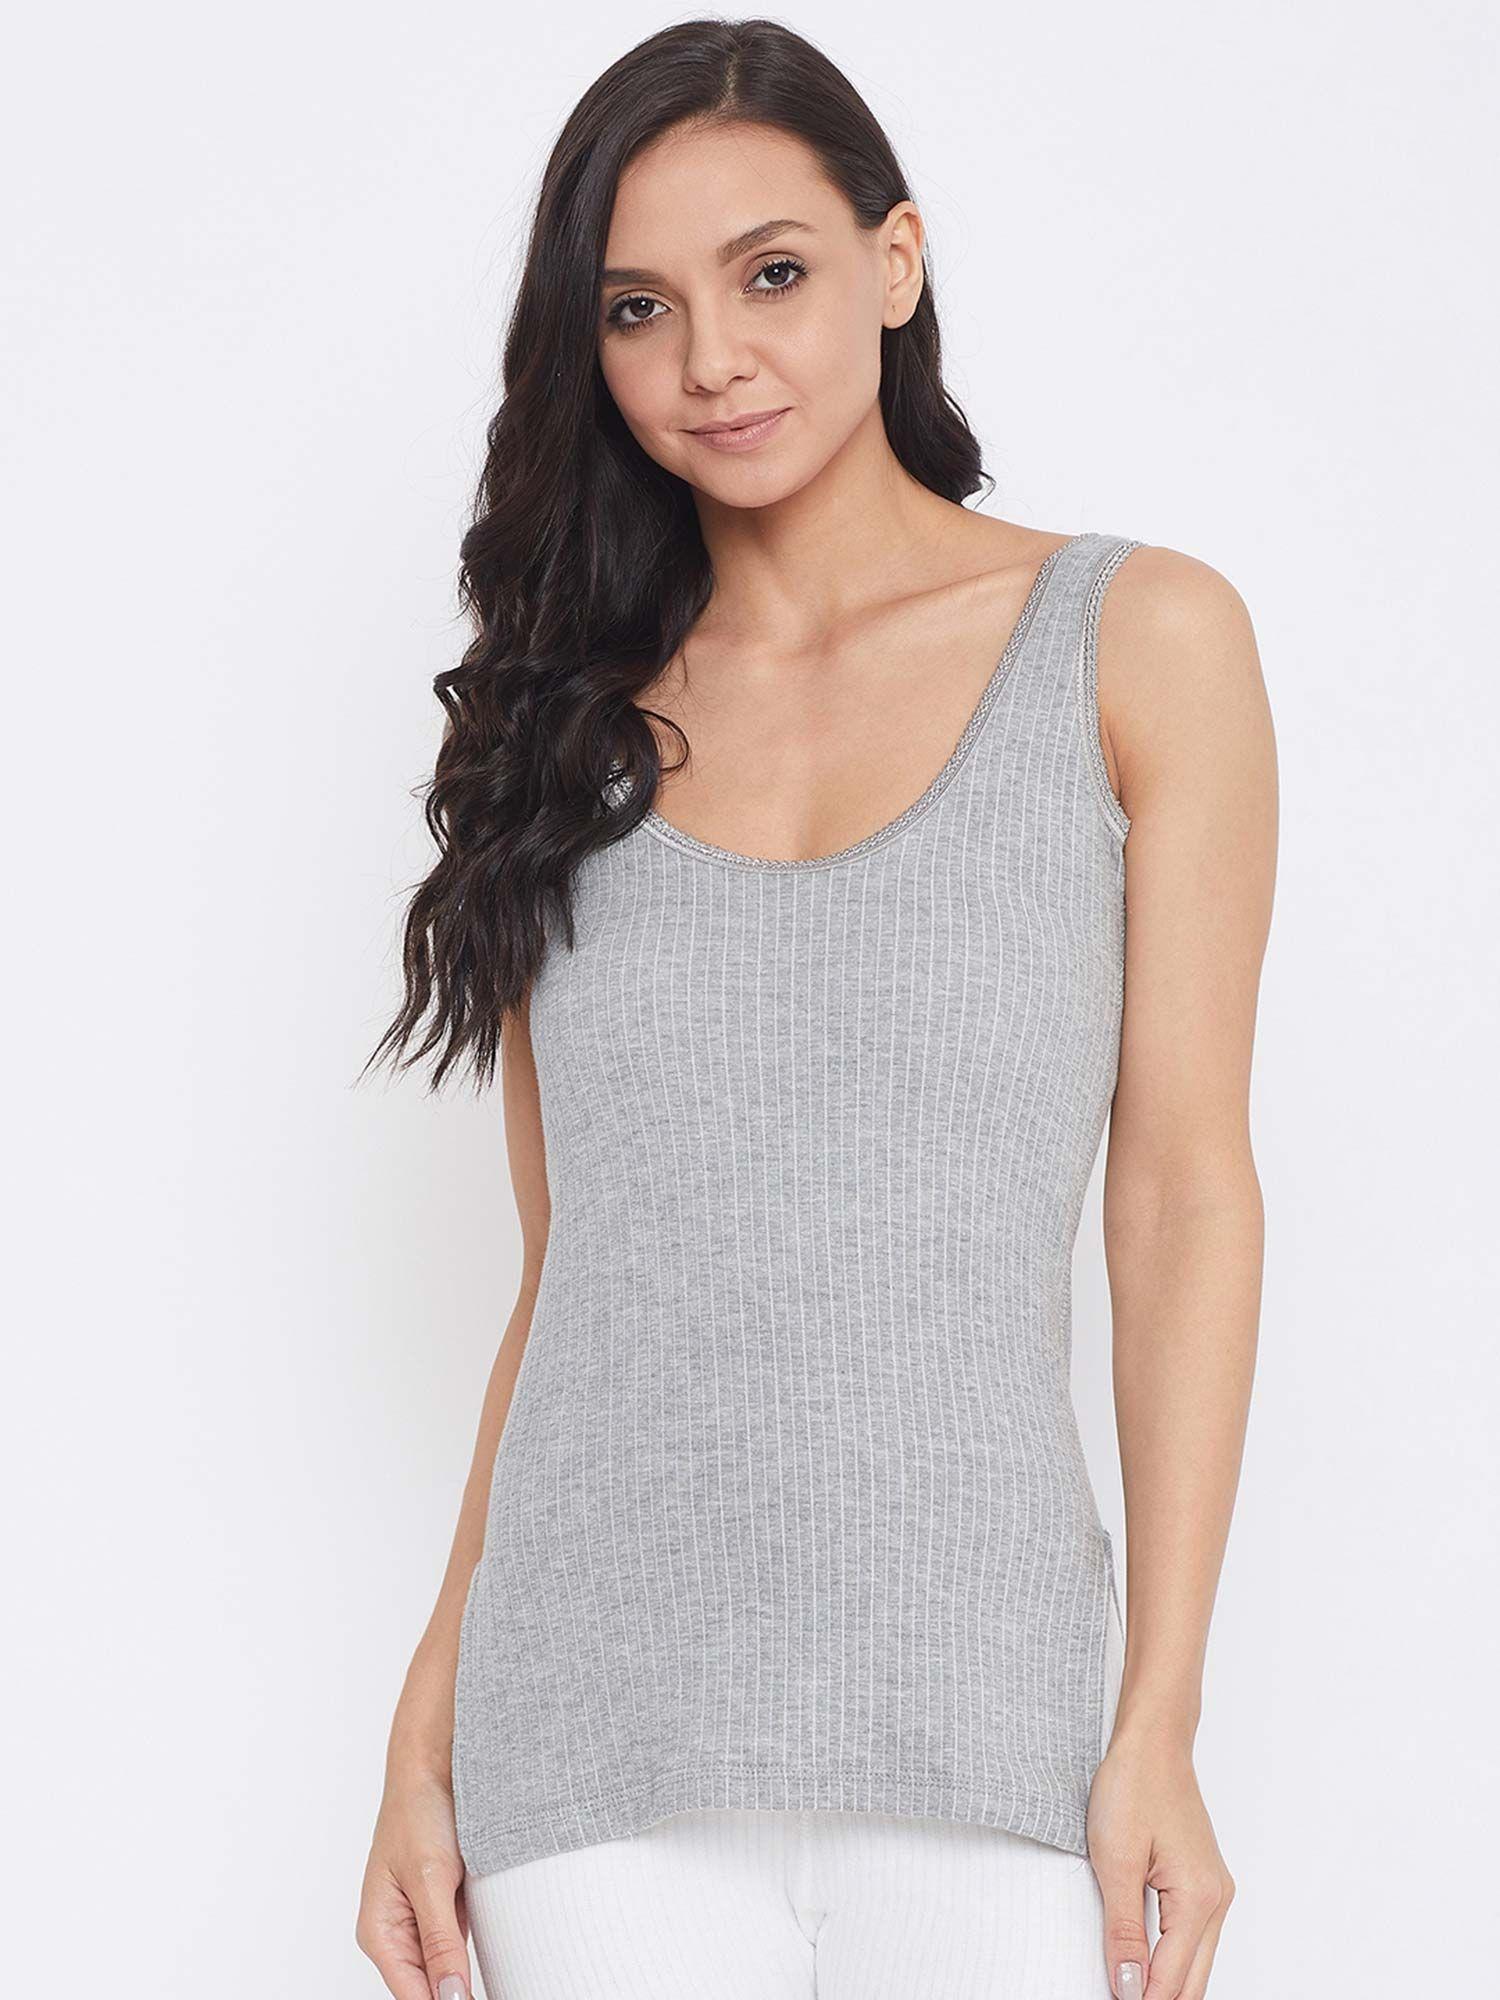 mod quilt round neck sleeveless milange grey thermal upper for women